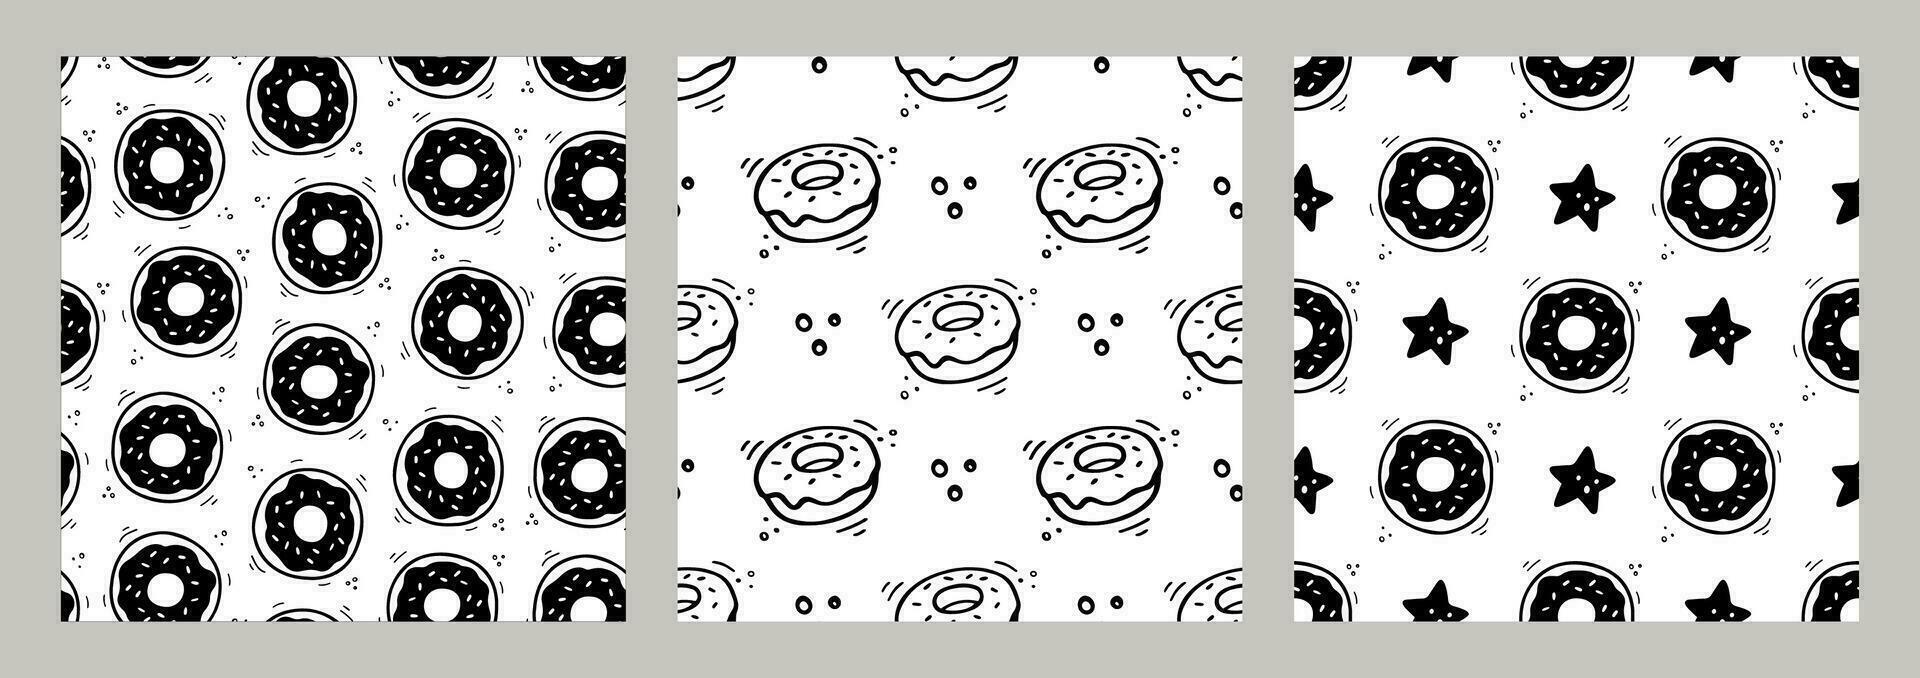 Hand drawn Donut pattern. Set of fast food seamless patterns. Comic doodle style. Vector Fast food illustration. Sketch of doughnut.